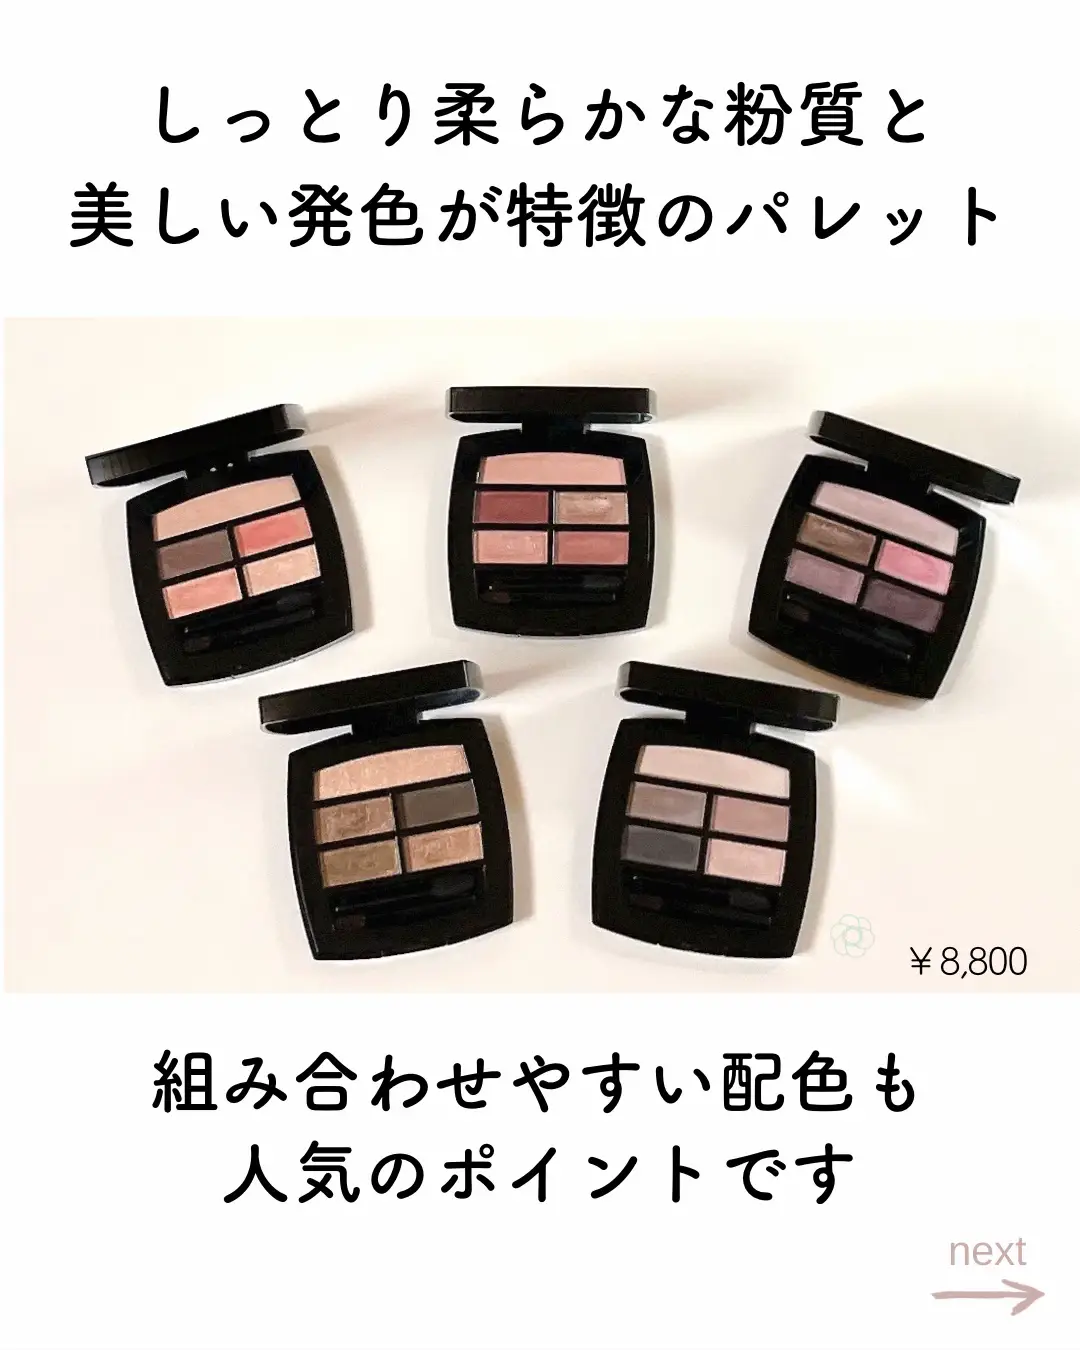 CHANEL LEBEIGE PALETTE REGARD ALL COLORS REVIEW, Gallery posted by  ［柏］kurumi イメコン